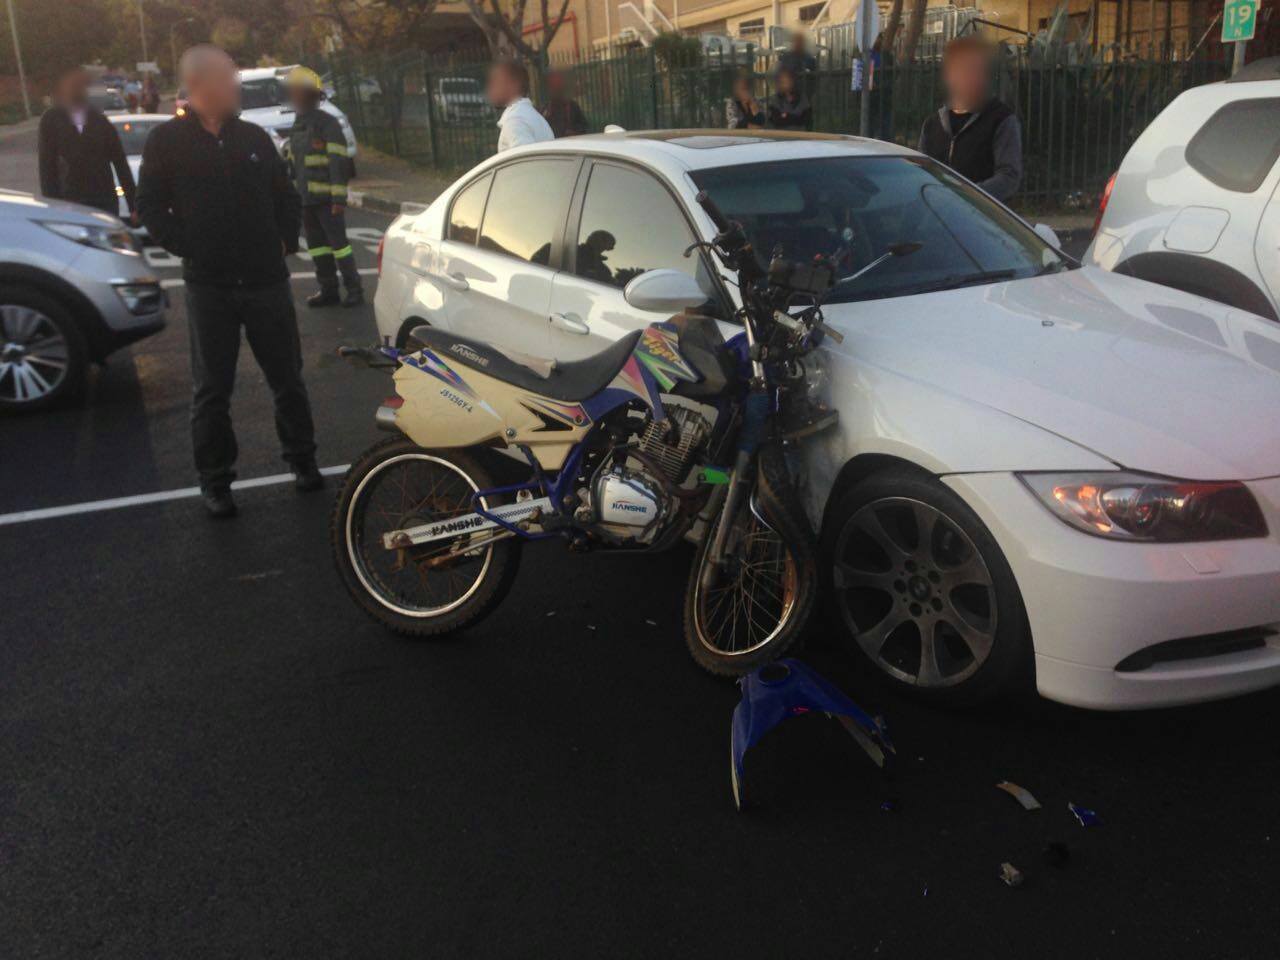 Biker critically injured in collision at intersection in Glenvista